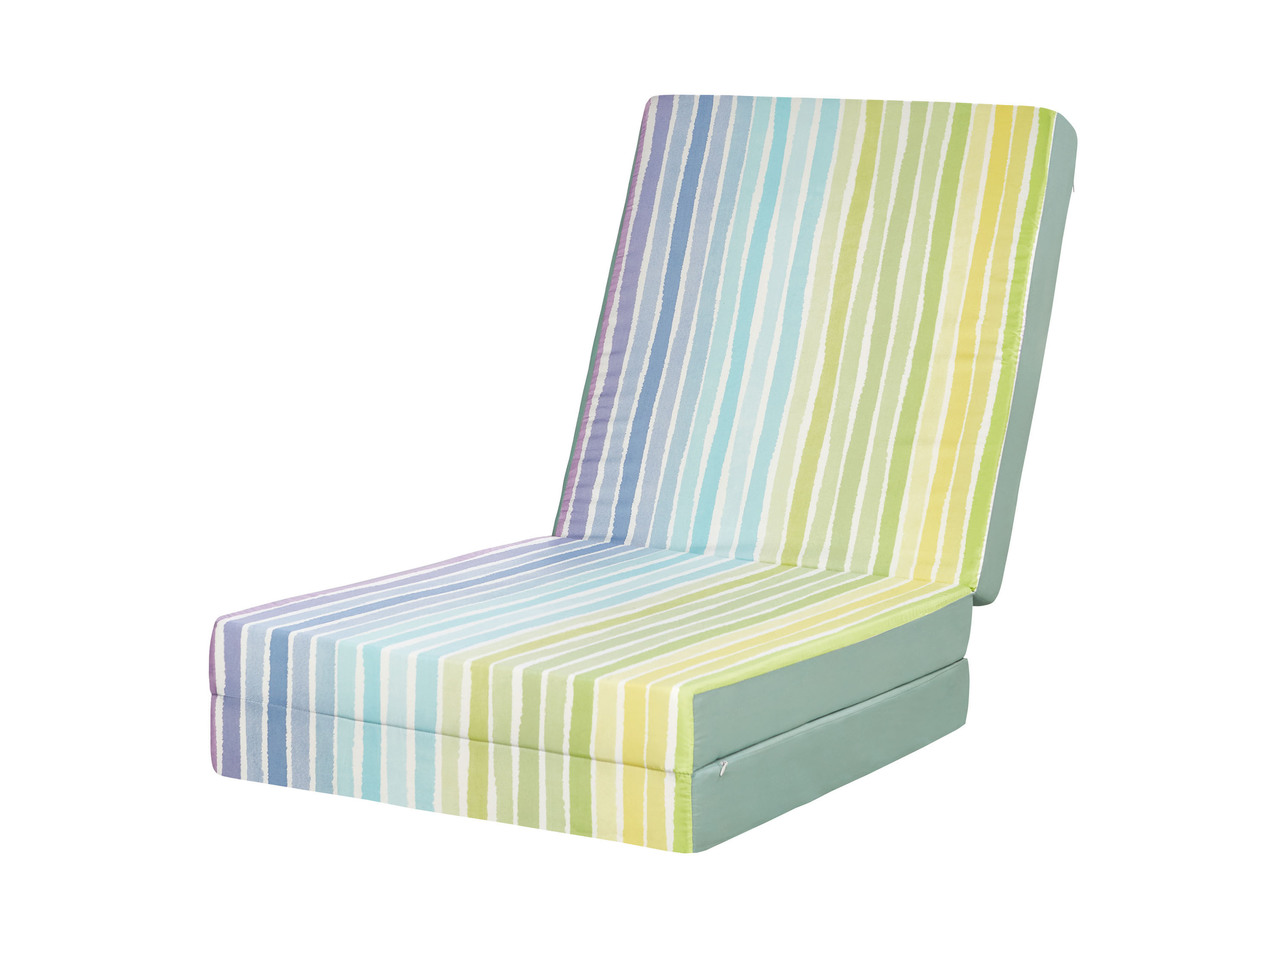 Striped Chair Bed, 190x65cm